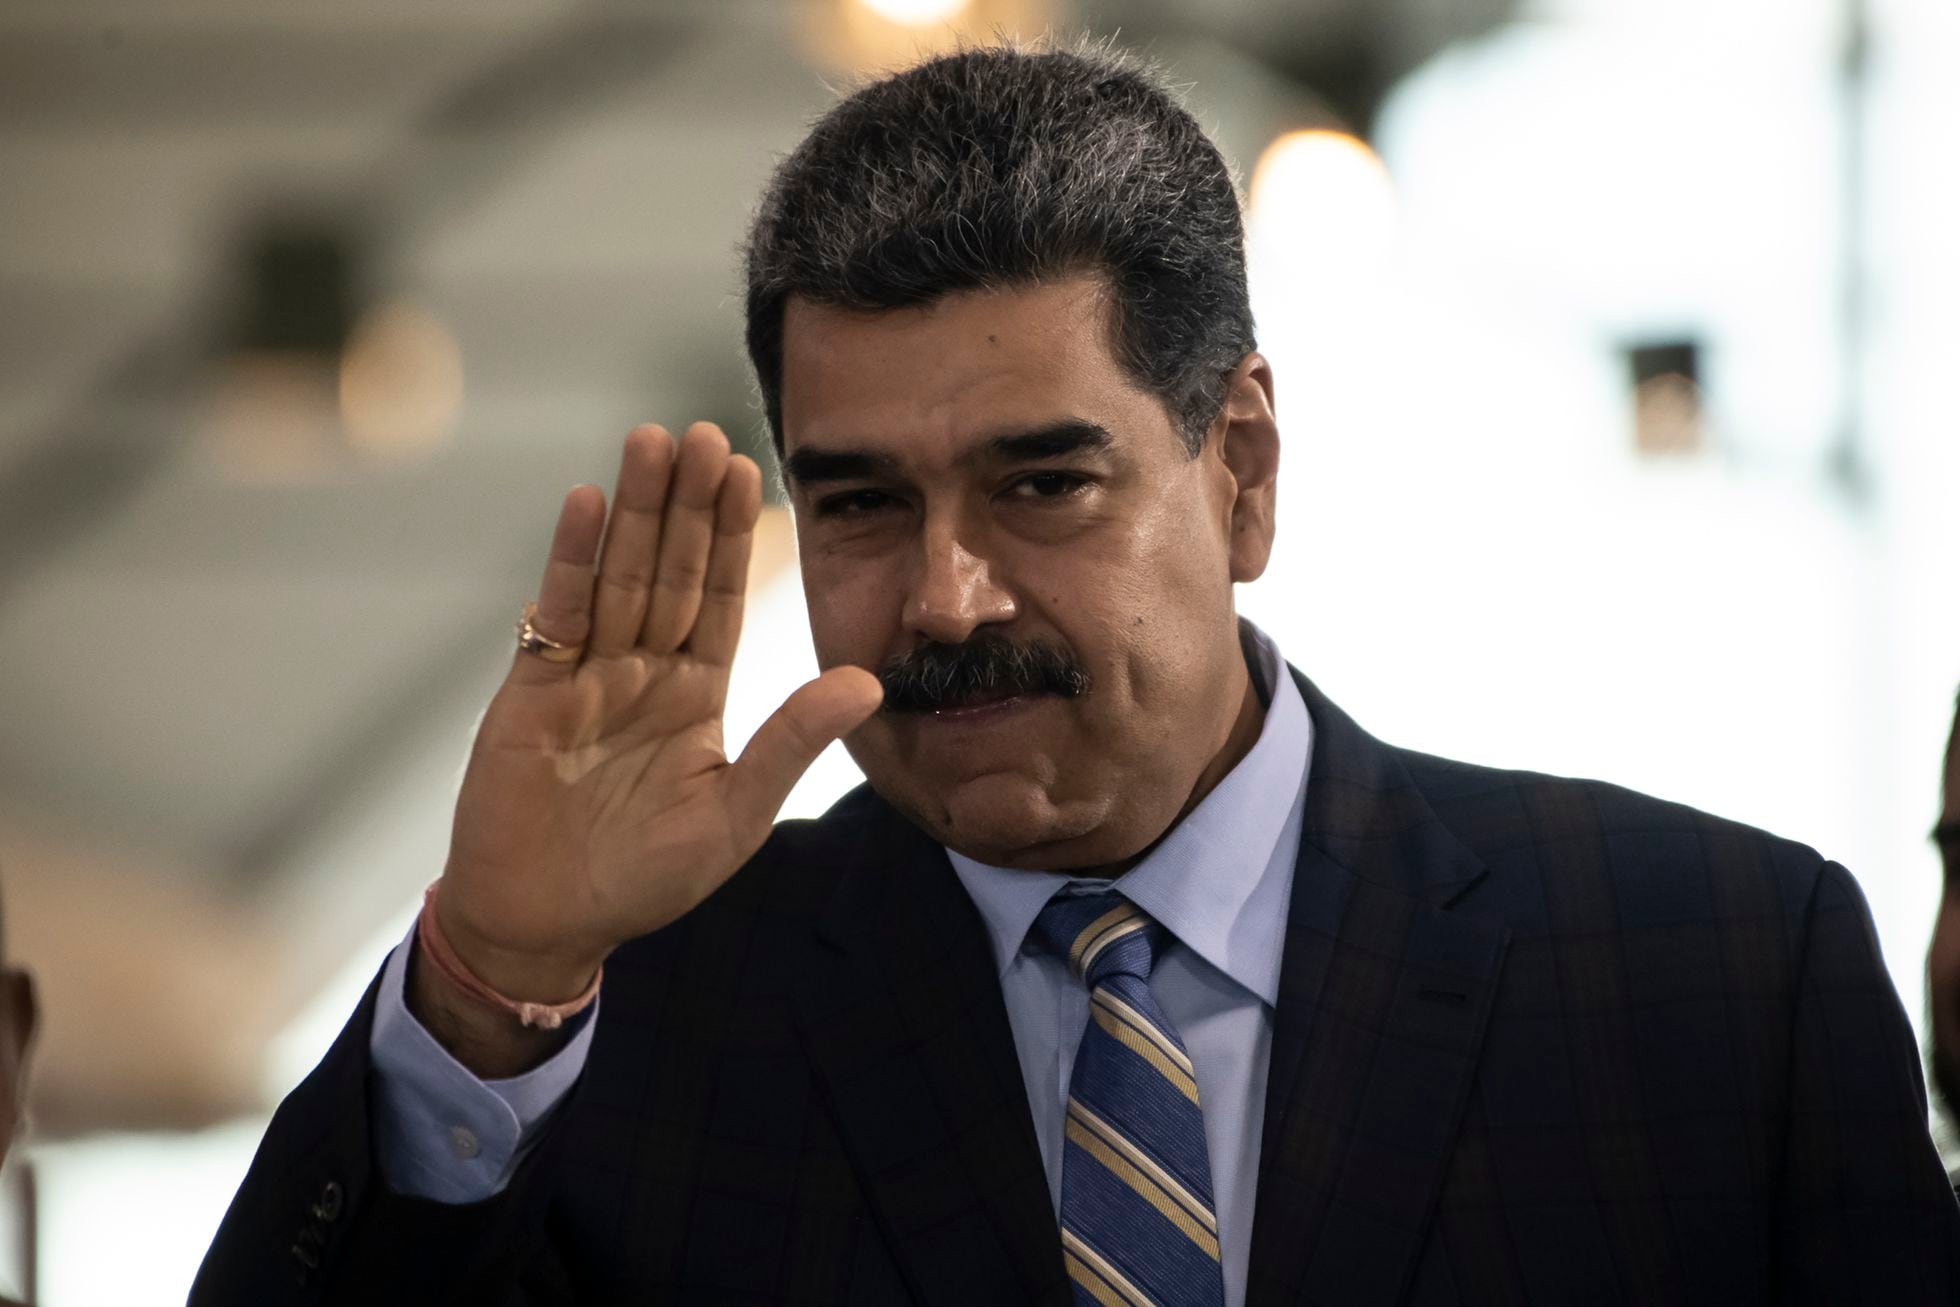 Nicolás Maduro arrives at a meeting with the ‘National Council of Productive Economy’ in Caracas, Venezuela. CARLOS BECERRA (GETTY IMAGES)